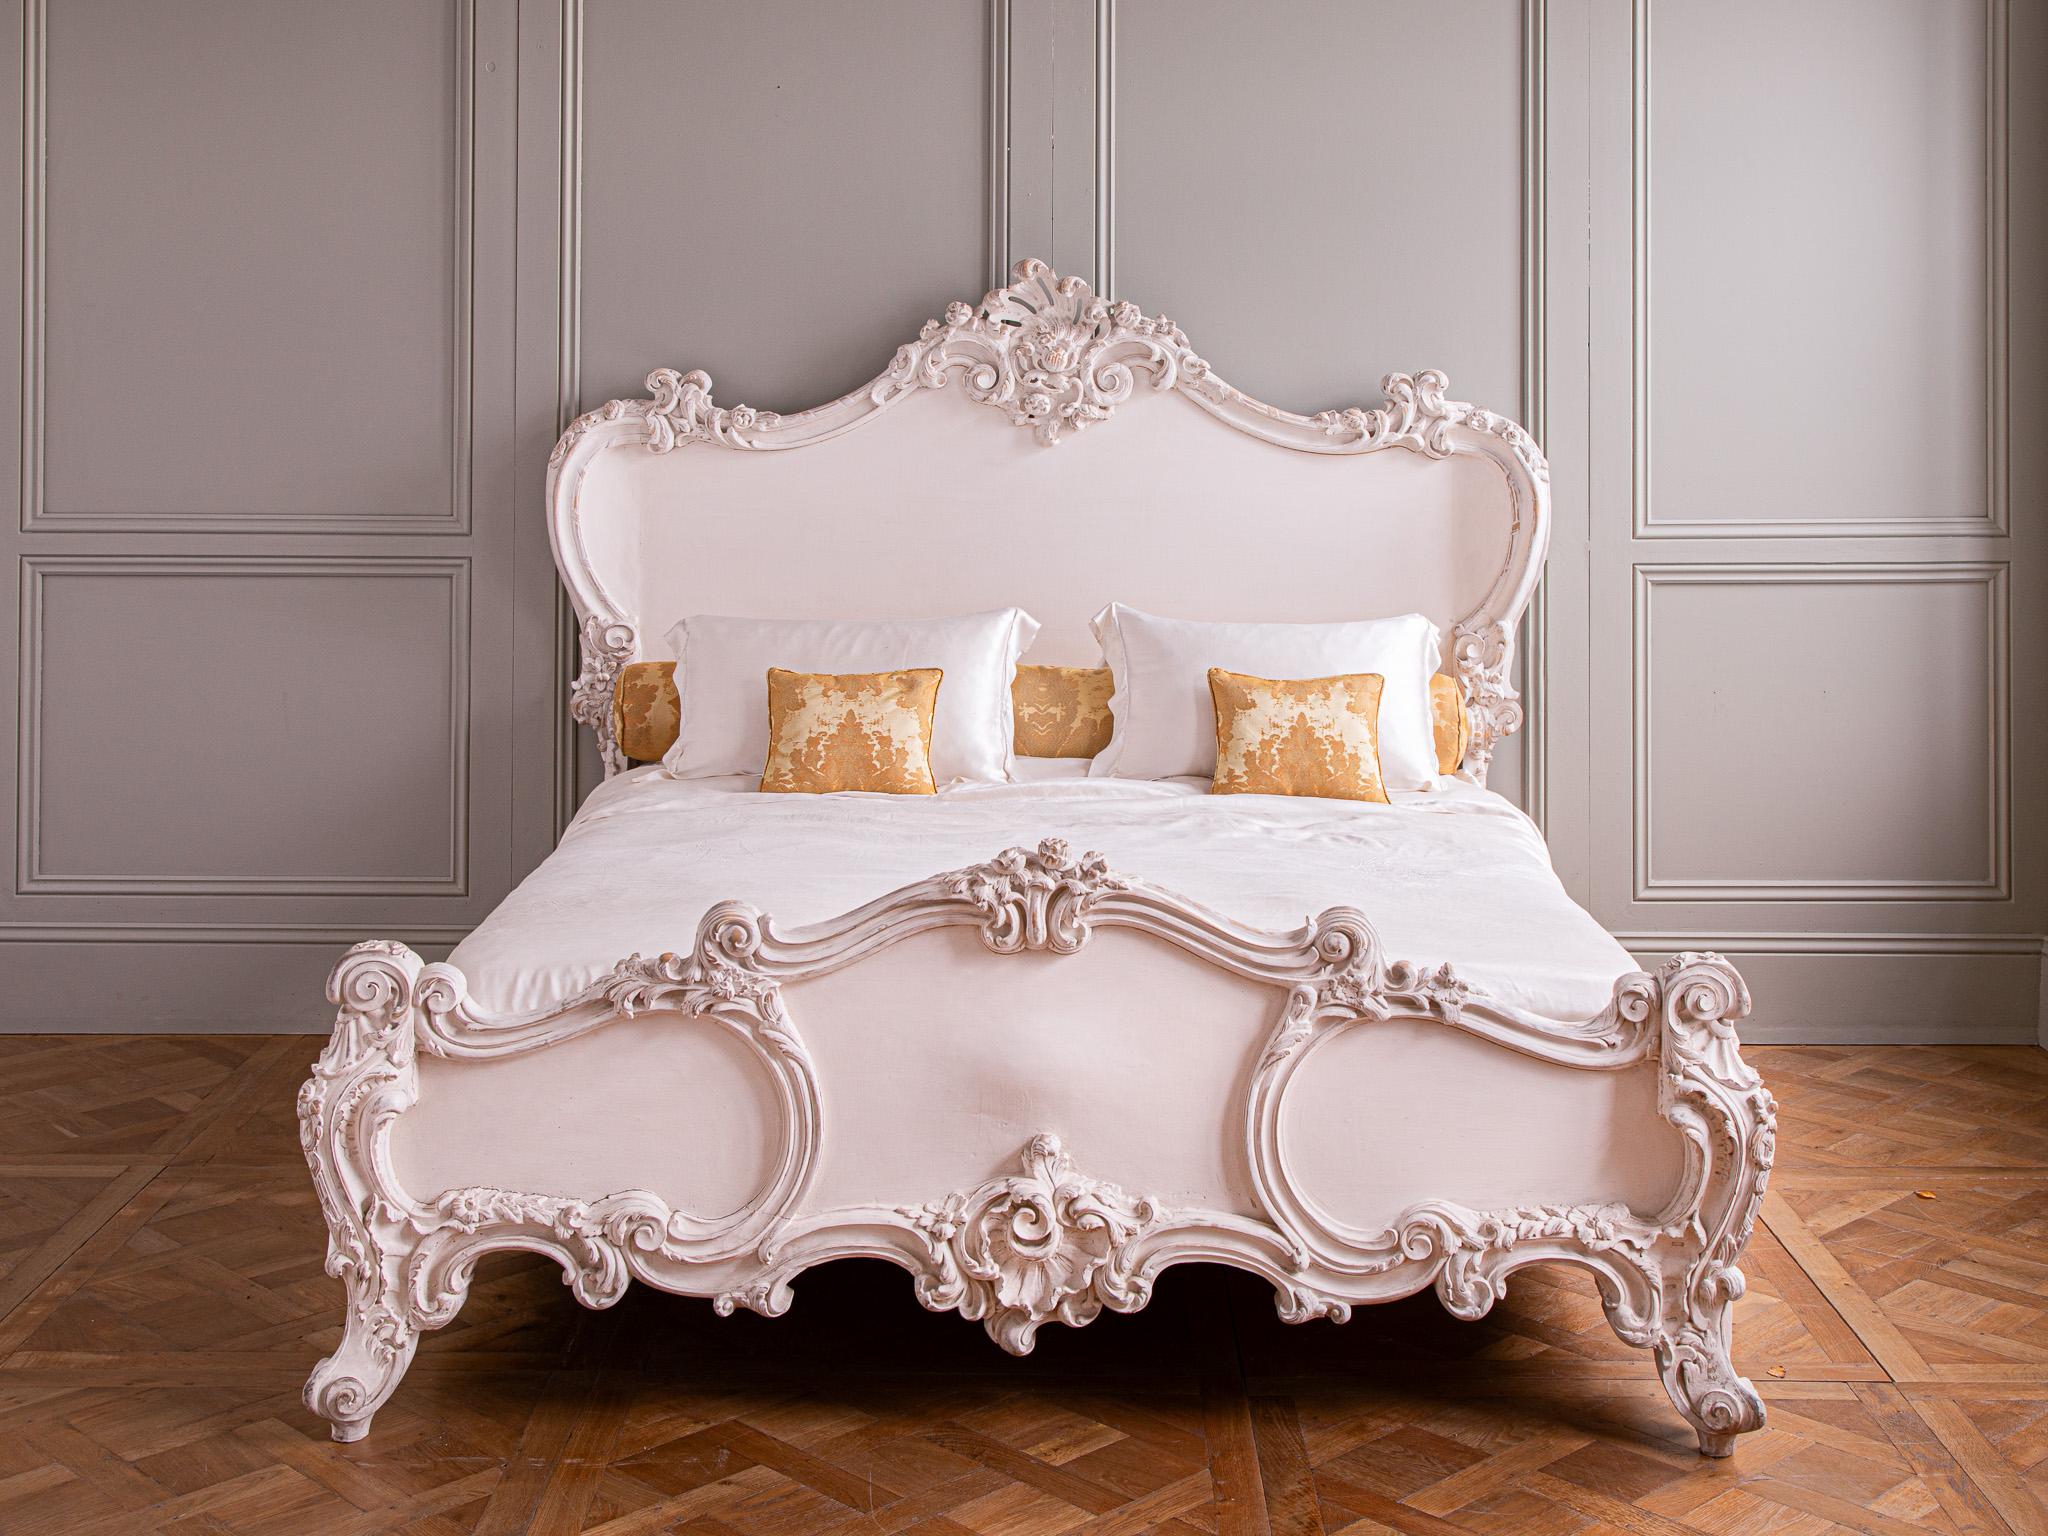 Our iconic, Rococo style Cherub Bed, hand carved in solid wood is featured in the bedrooms of Soho House and Crazy Bear. The carving on this bed is in the style of great French masters. It's playful curves and harmonious proportions make for an